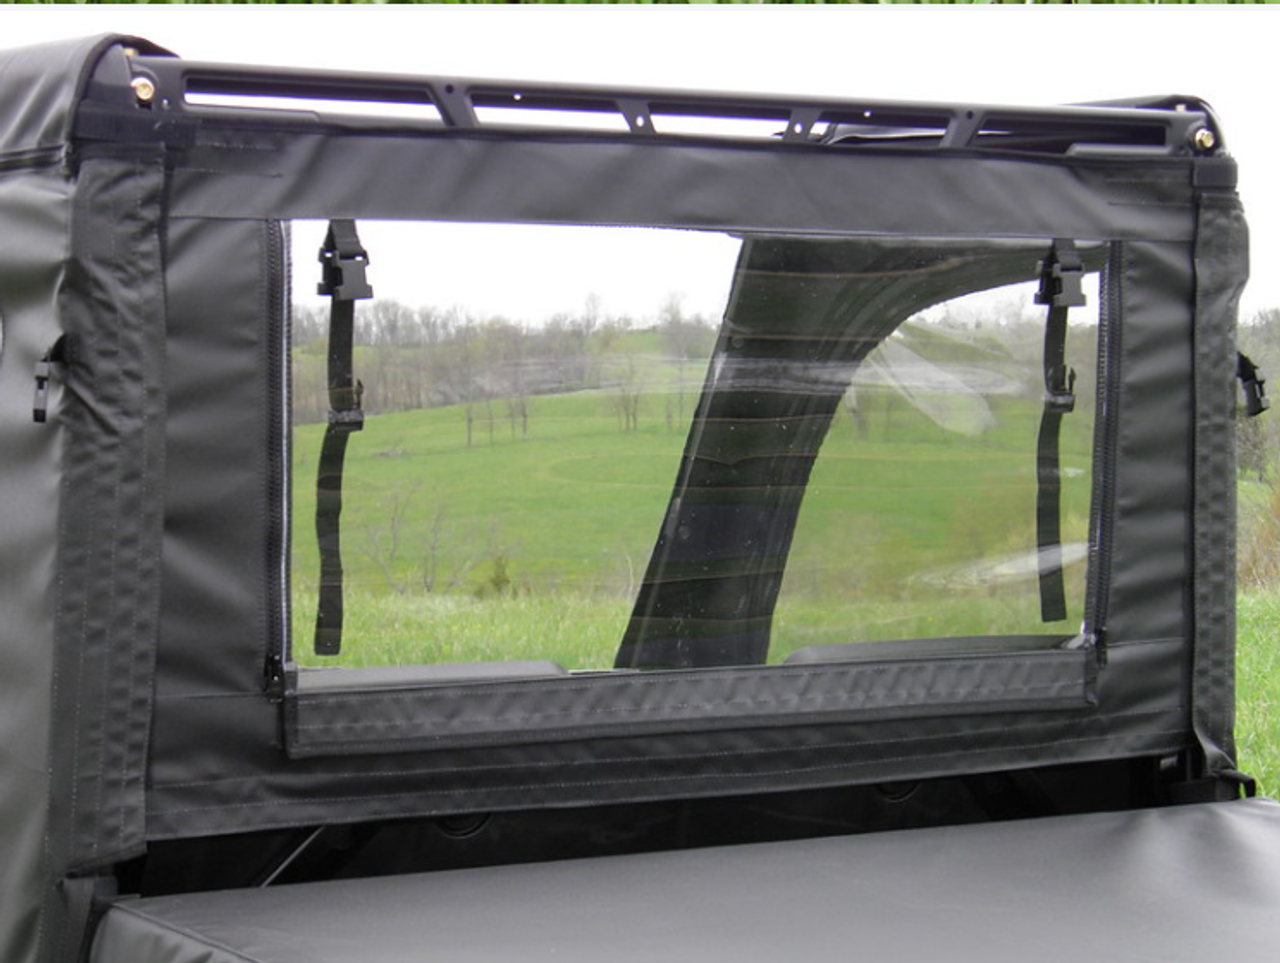 3 Star side x side Polaris Ranger Mid-Size 570 doors and rear window rear view